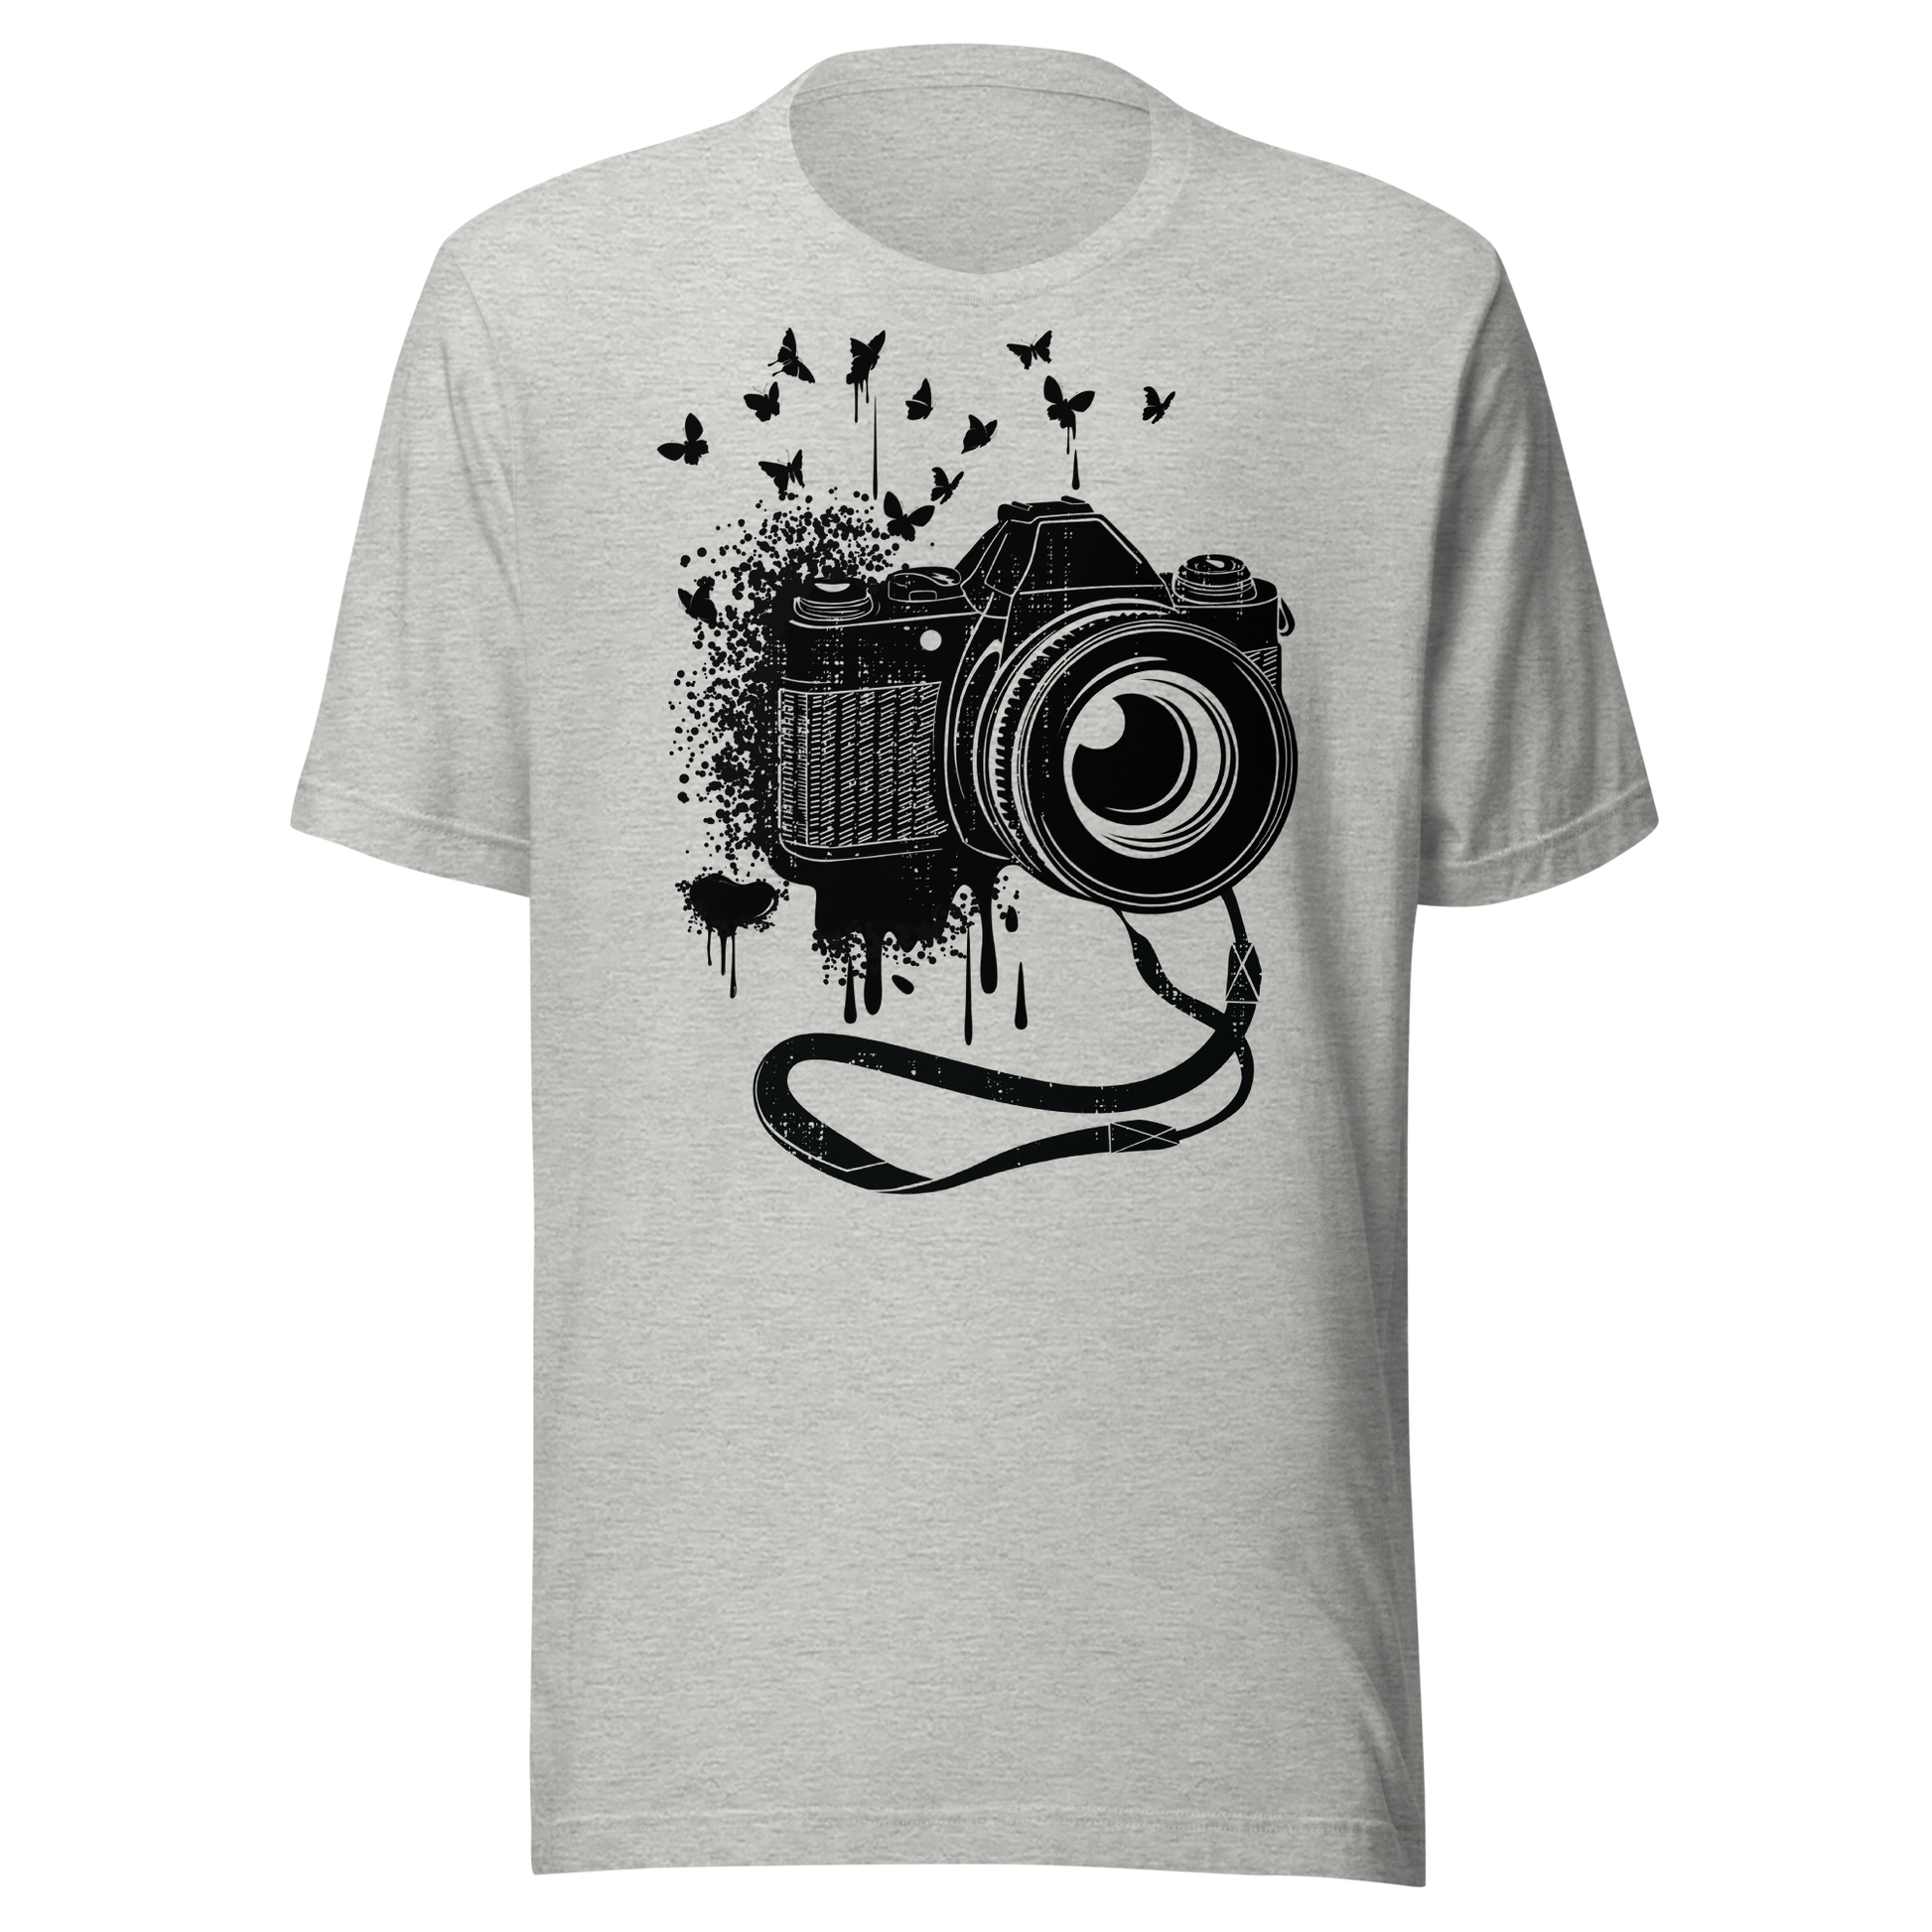 Retro Unisex T-Shirt - Vintage Camera and Butterflies Ghost Front